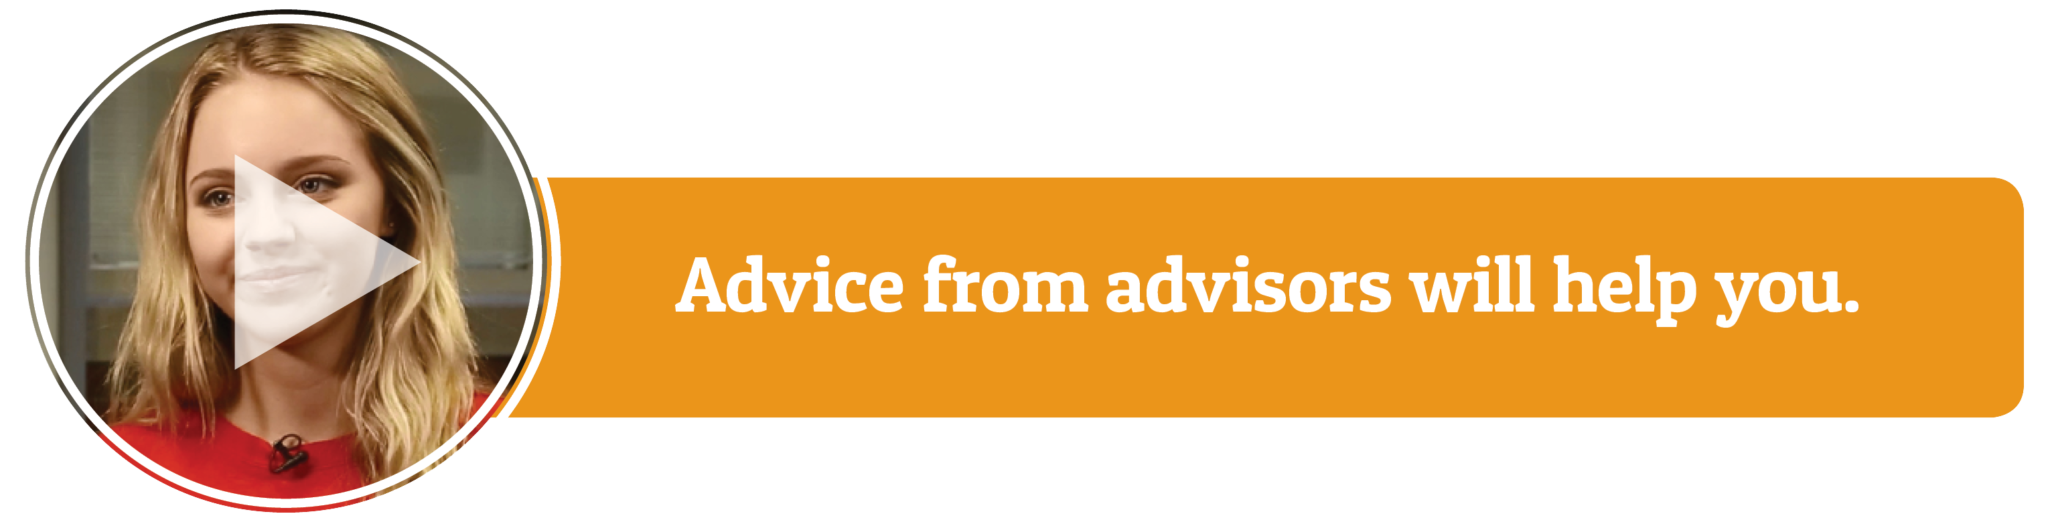 Advice from advisors will help you